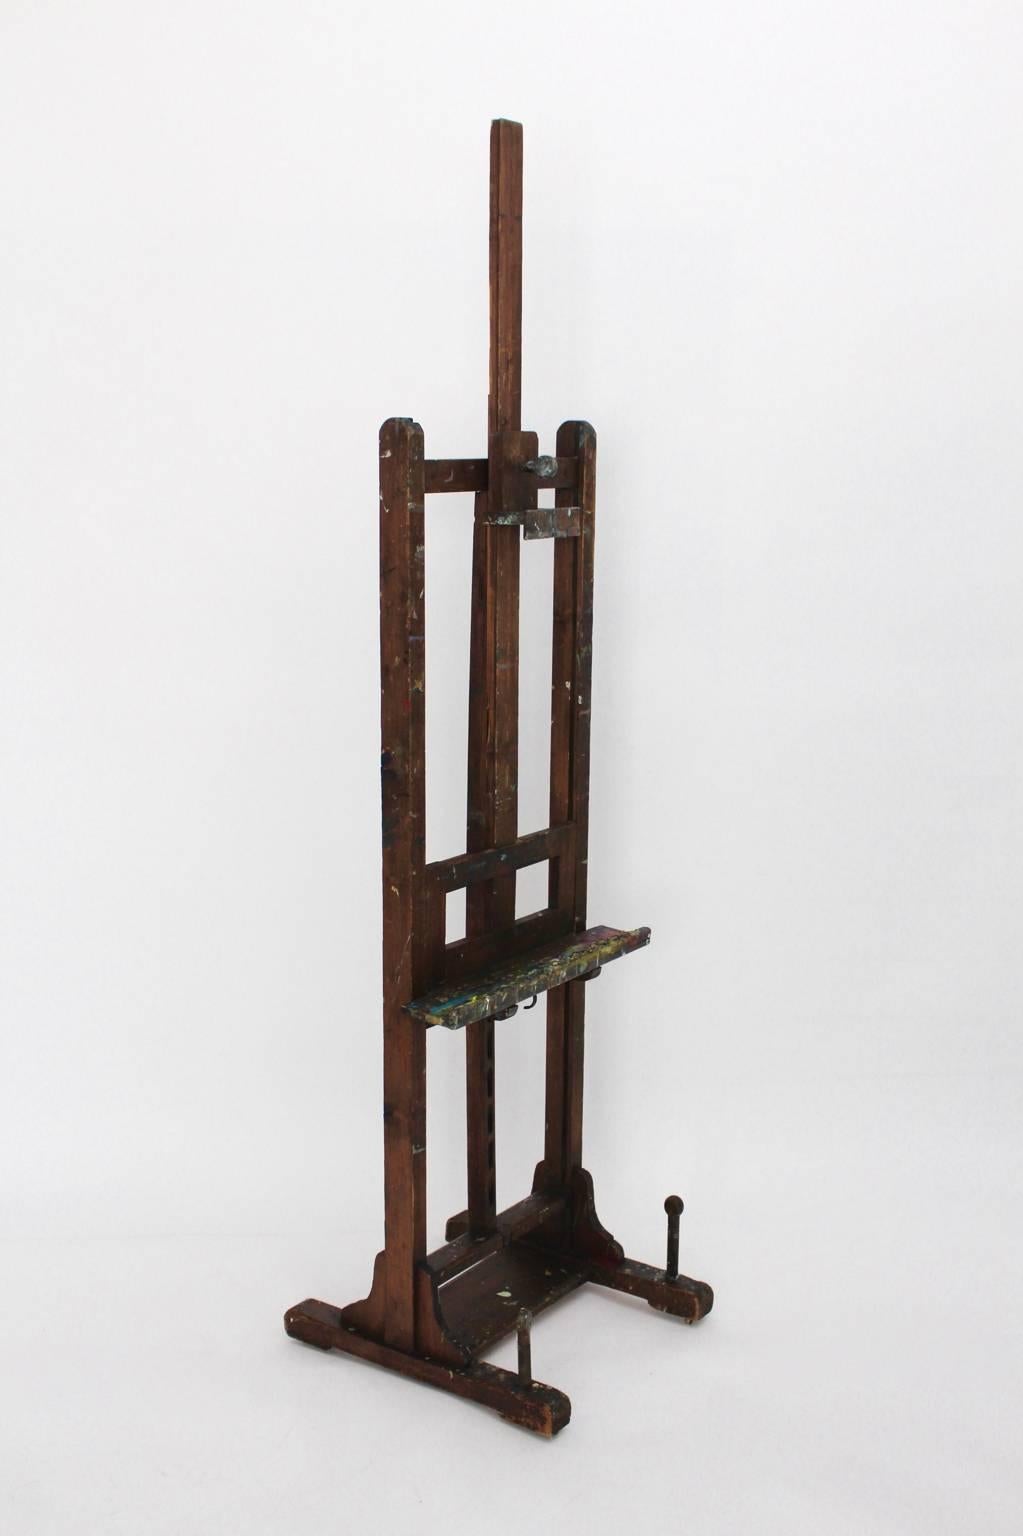 Very decorative Spence wood studio easel from a French painter with good patina and great color rests.

Up and down adjustable from 61.81 in to 98.43 in, four brass wheels.
Good useful condition.

Measures: Width 22.44 in (57cm).
Depth 21.65